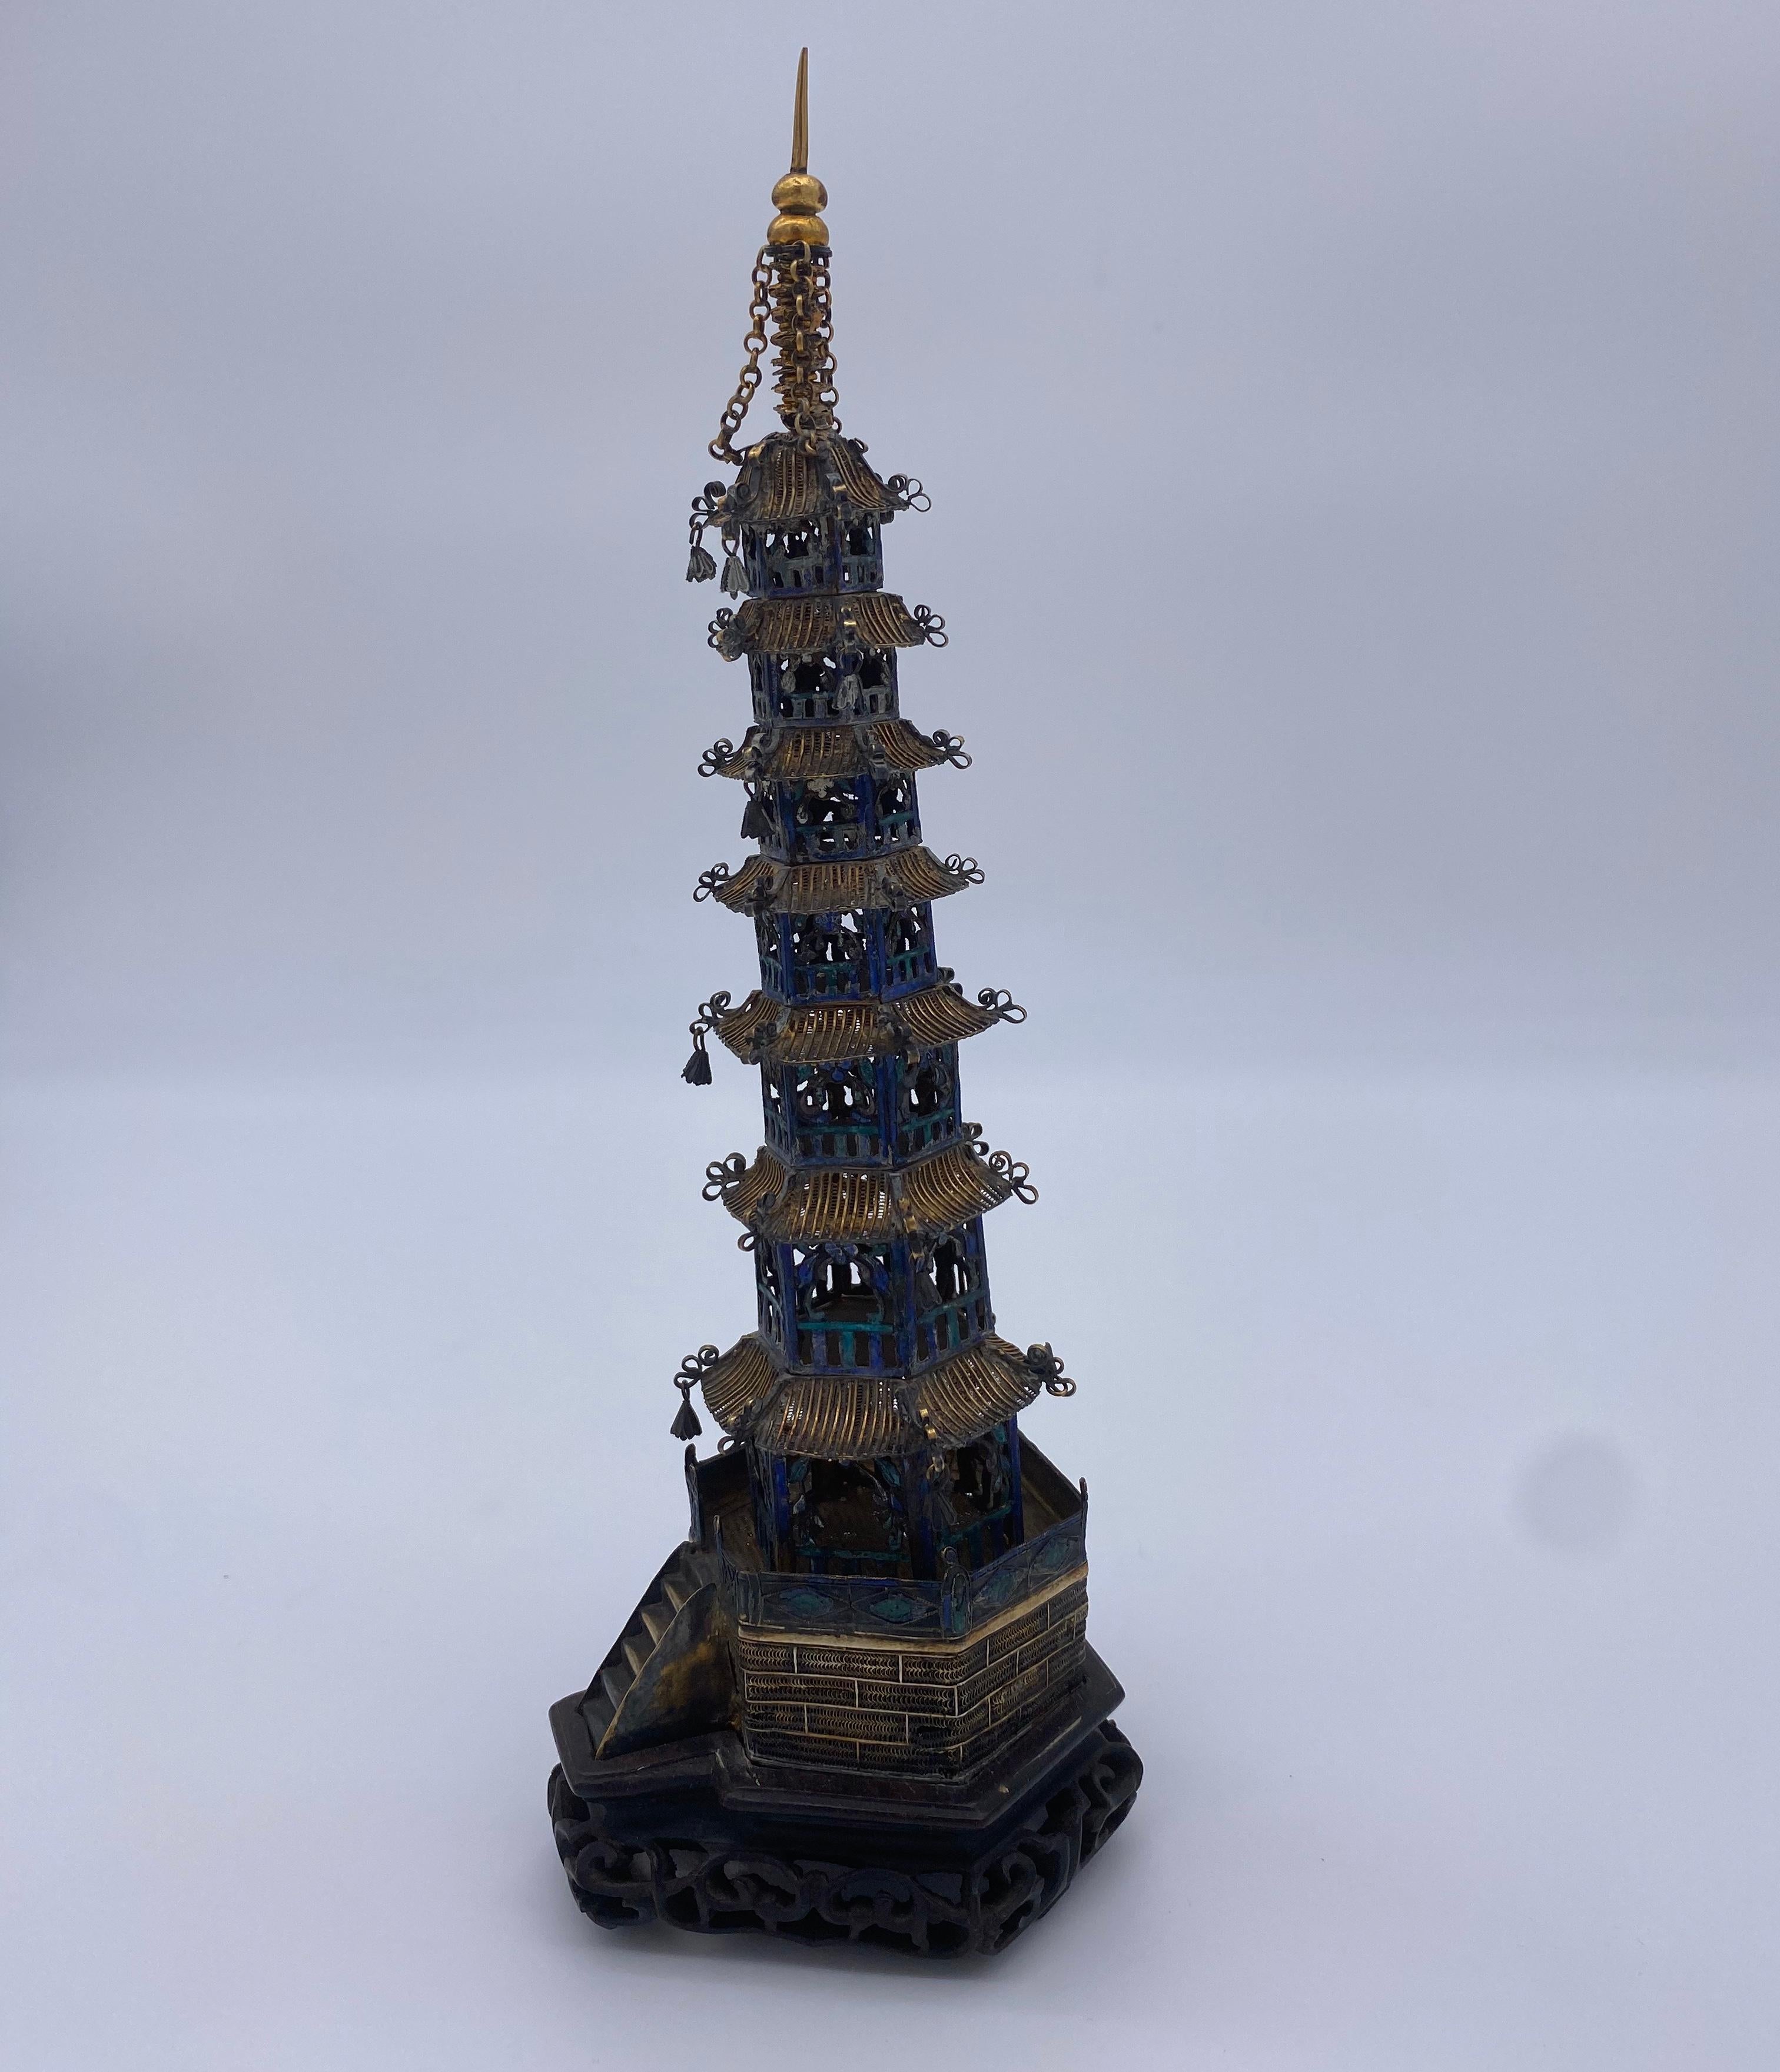 19th century Chinese pagoda. Sterling silver sculpture and golden sterling silver filigree, decorated with poly chrome enamels. Not marked. Cast wood base. Failures and minor defects. Approximately: 154 grams.